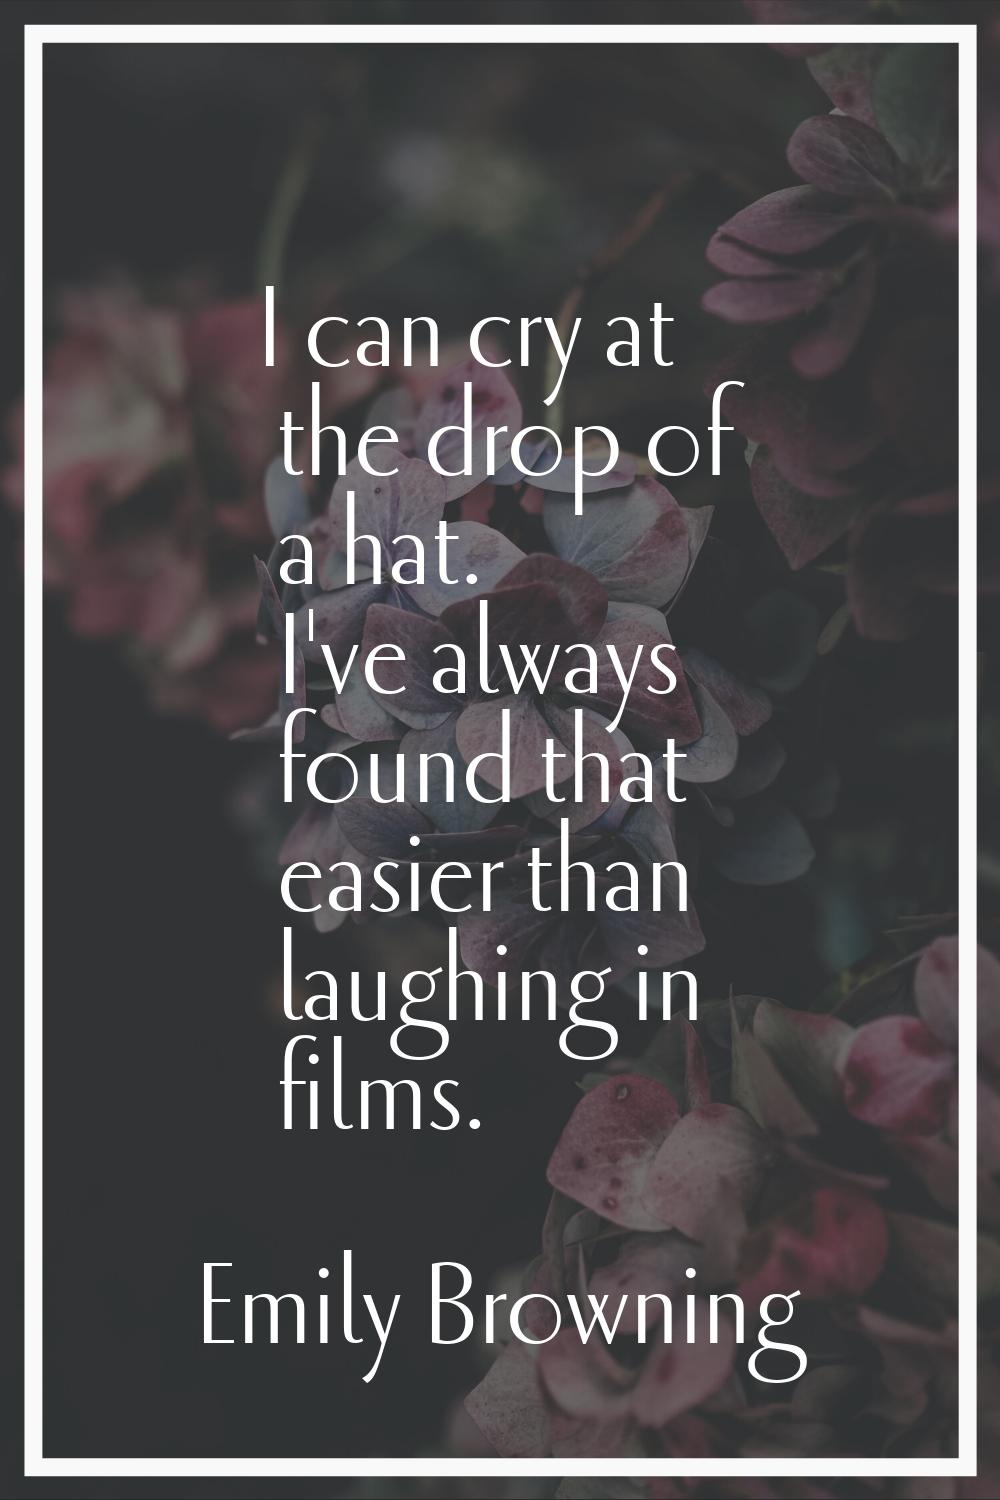 I can cry at the drop of a hat. I've always found that easier than laughing in films.